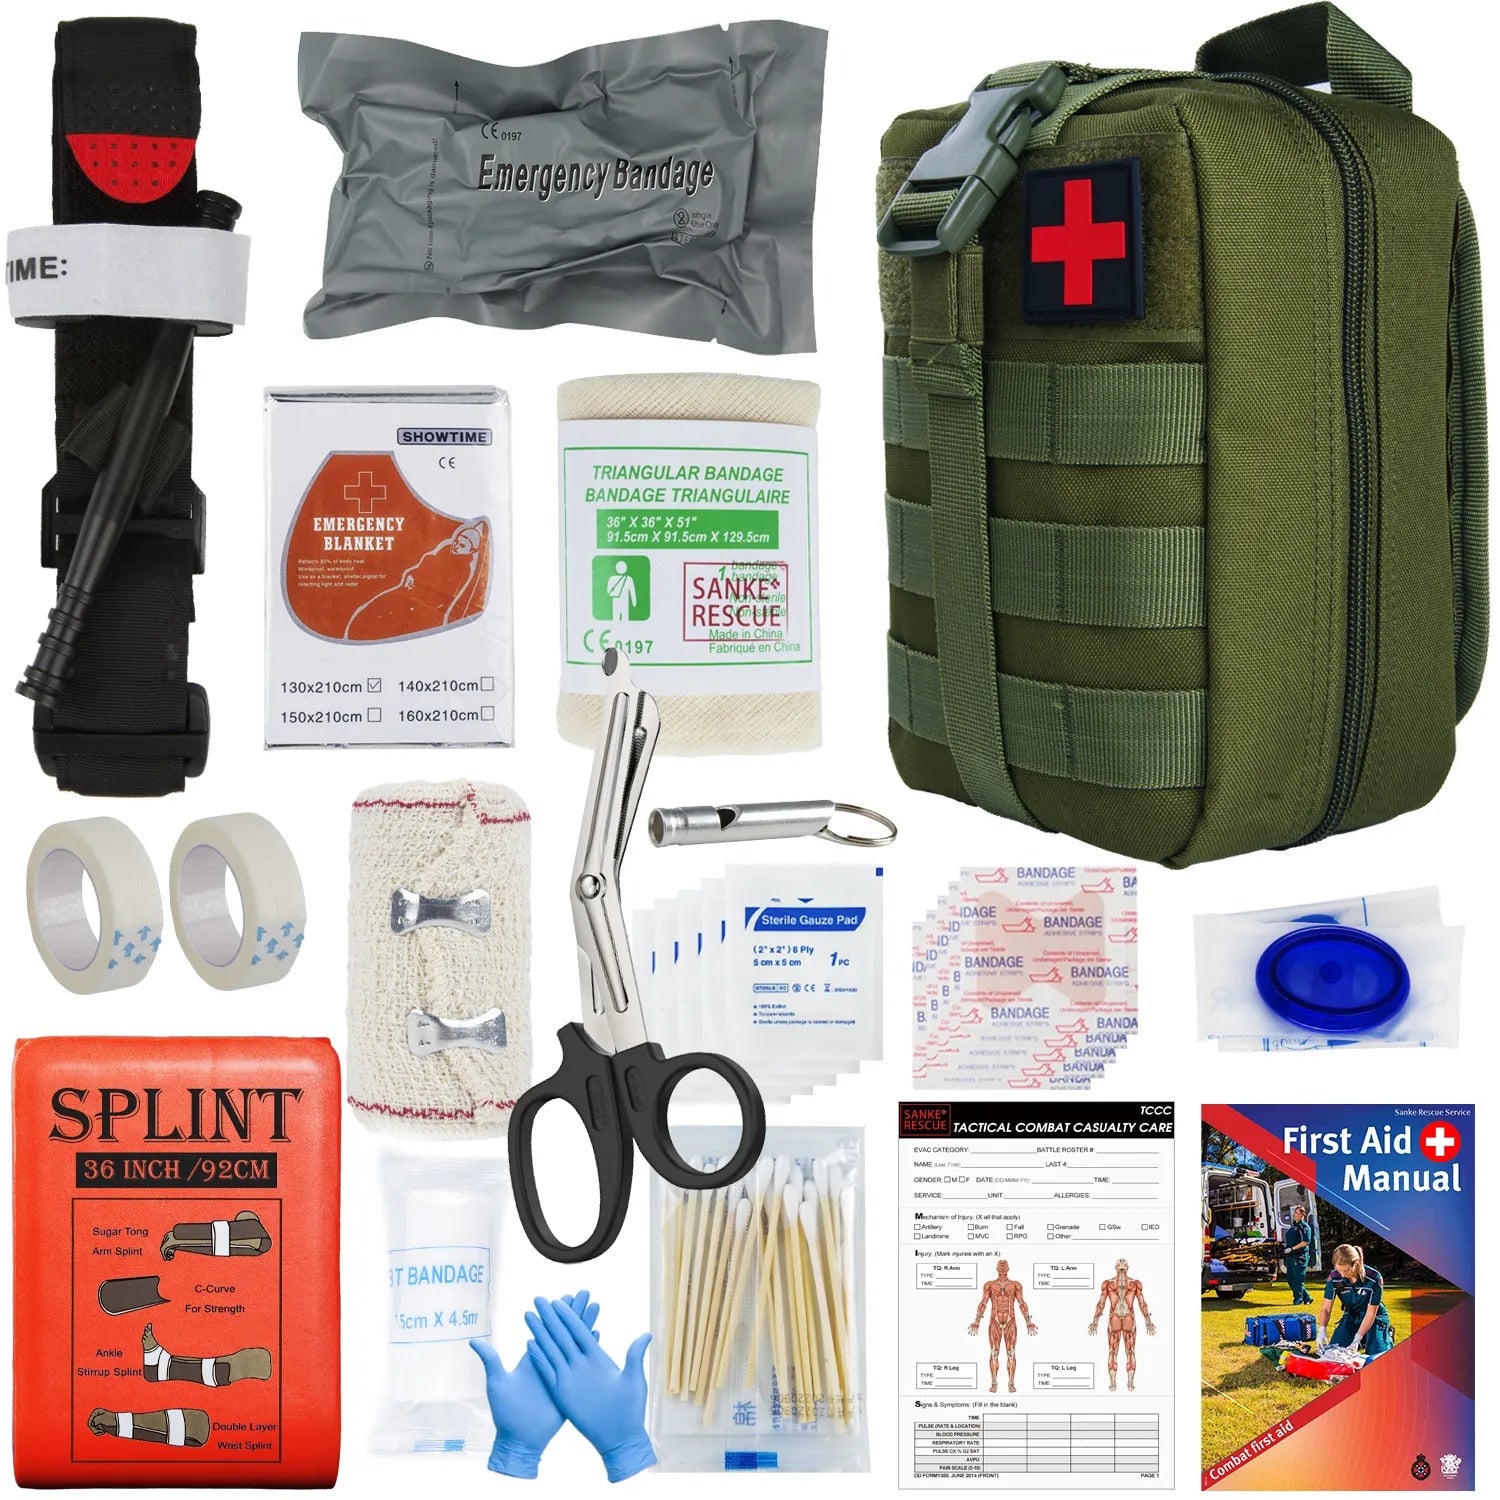 Cloud Discoveries Military IFAK Trauma Survival Kit - First Aid Emergency Gear with Molle